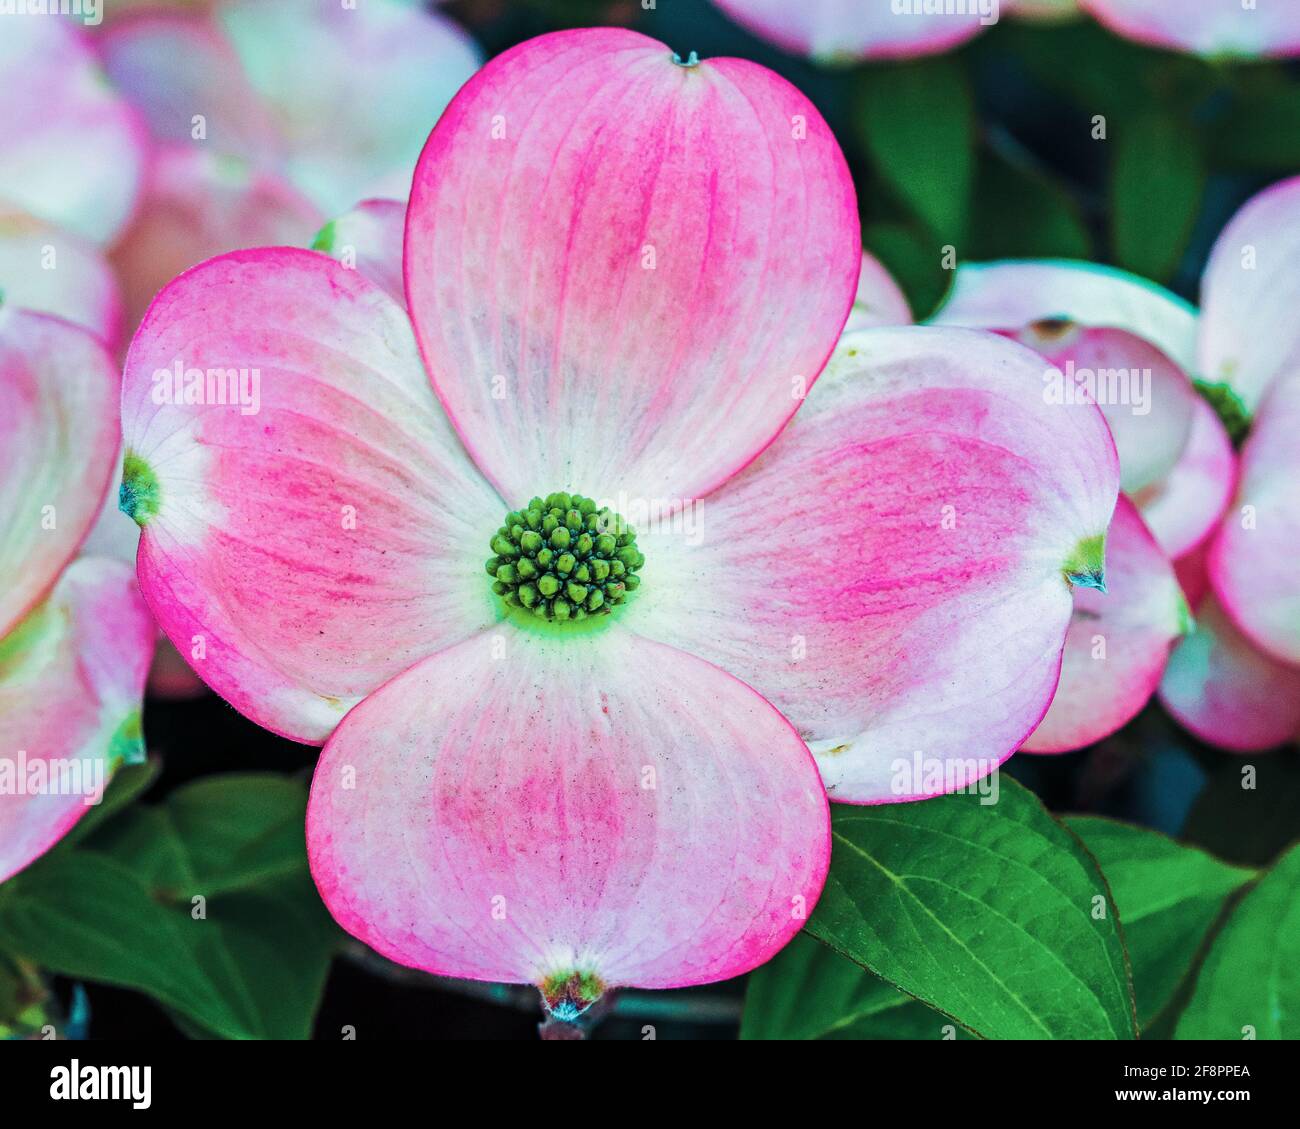 Dogwood tree blooming in the spring Stock Photo